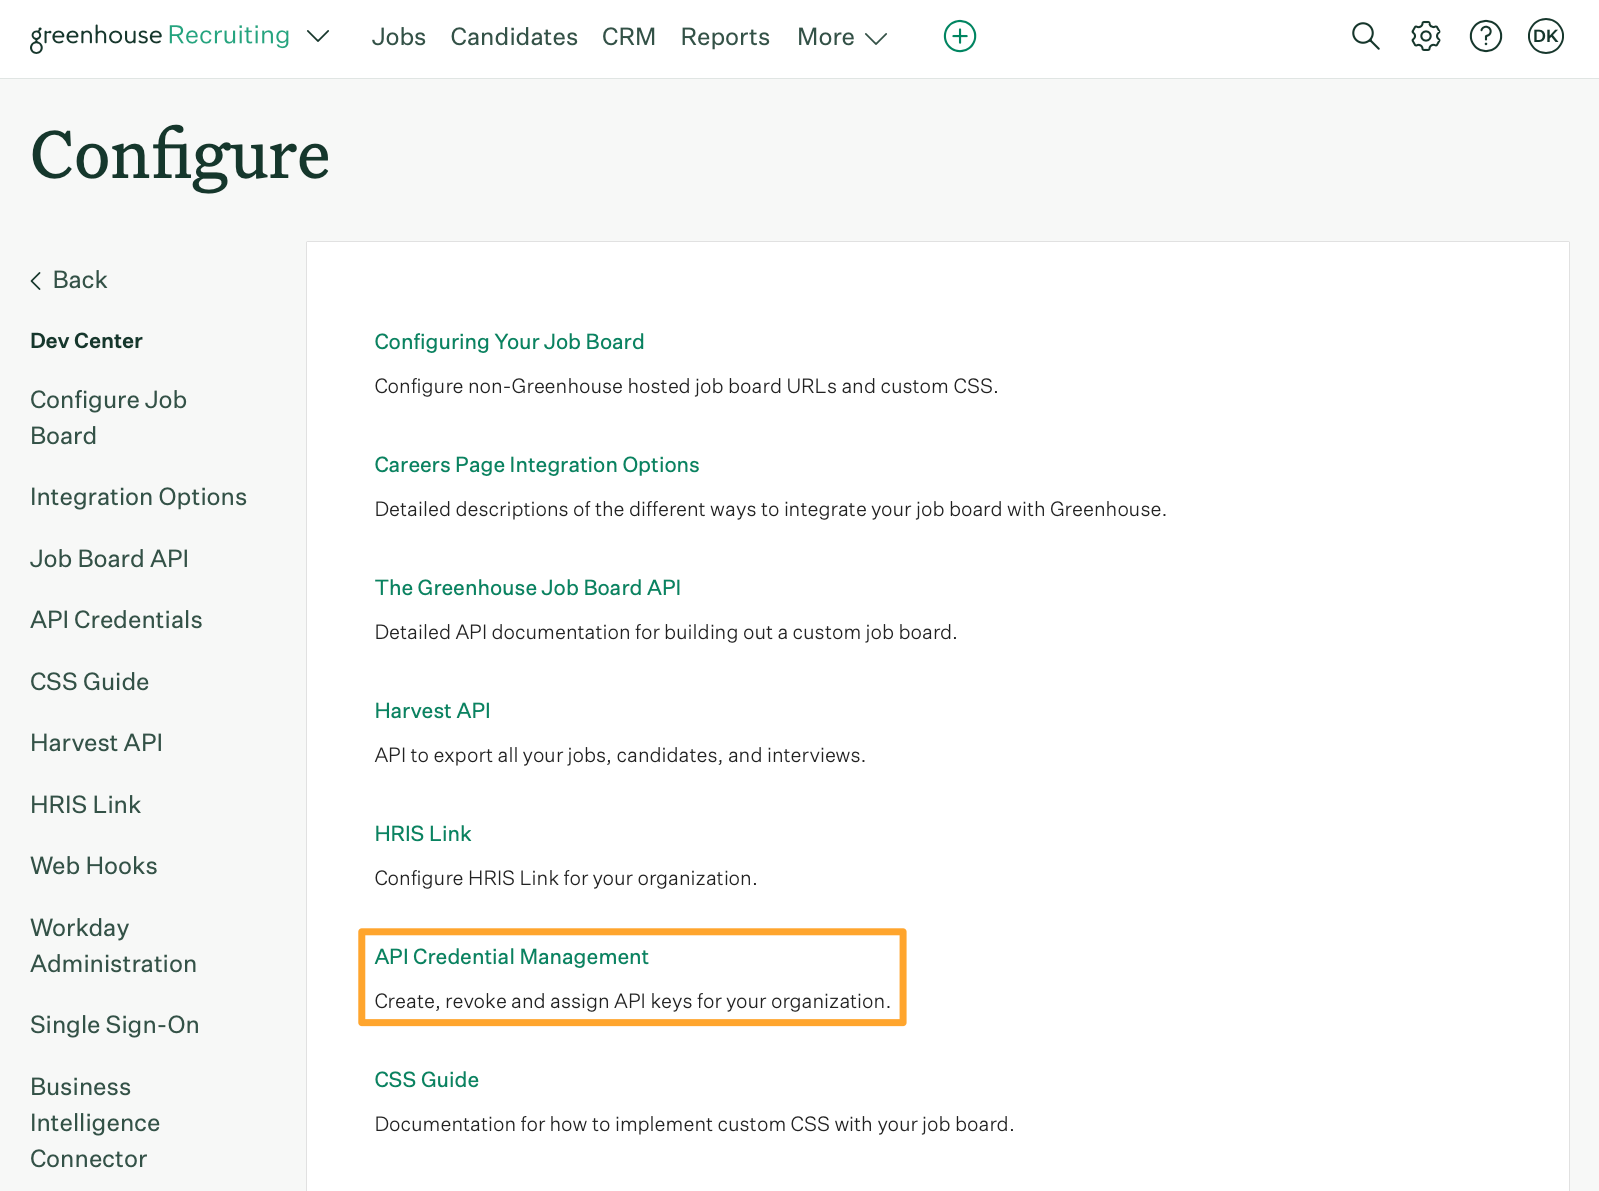 The Dev Center page shows API Credential Management highlighted in marigold in the middle of the page